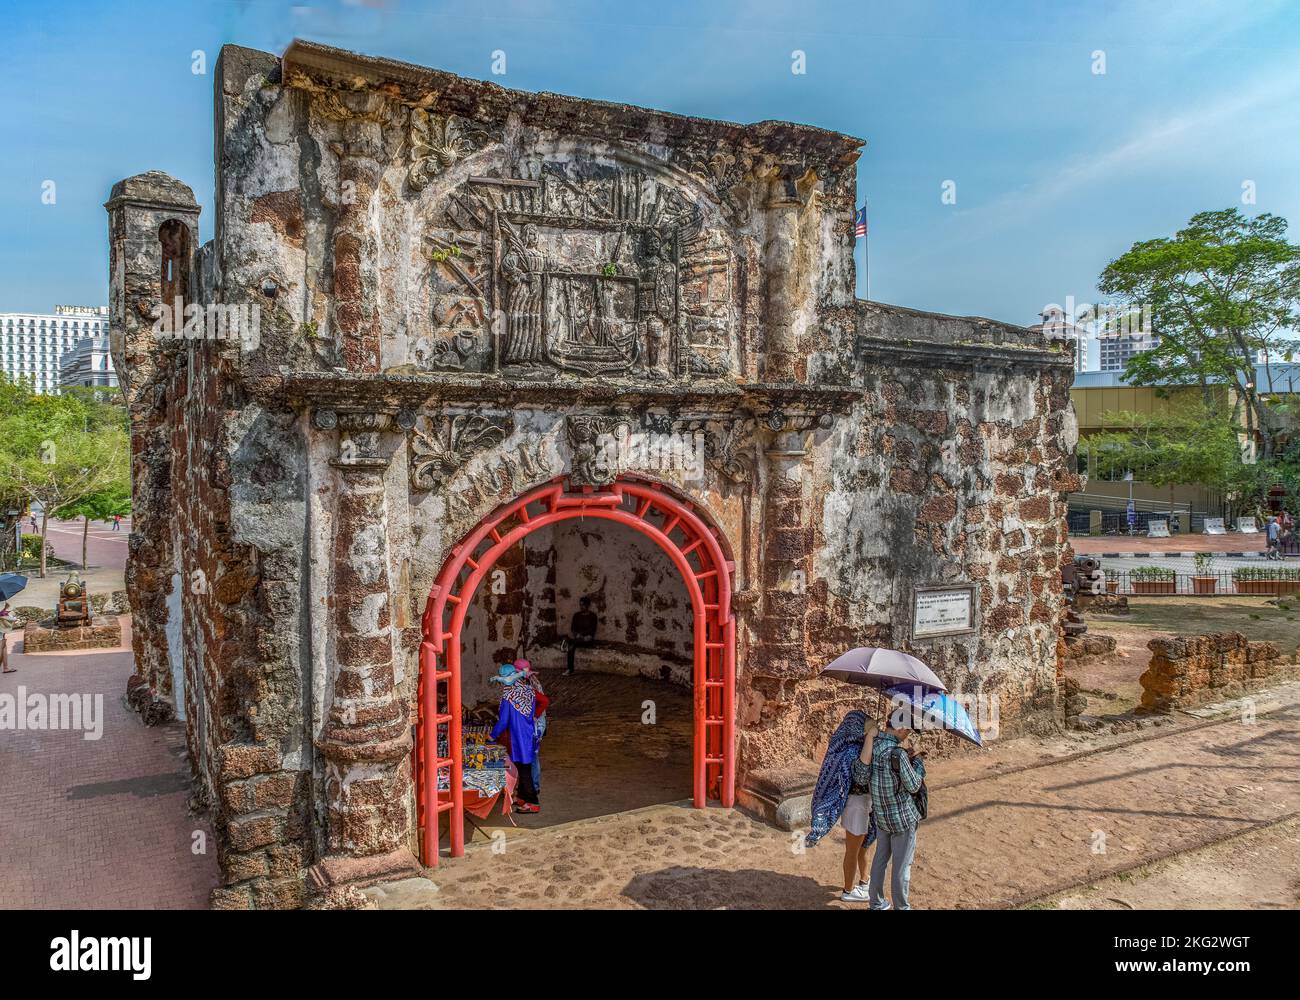 Malacca City, Malaysia - February 28th 2018: Tourists at the Porta de Santiago gateway which is part of the A Famosa (The Famous) a Portuguese fortres Stock Photo